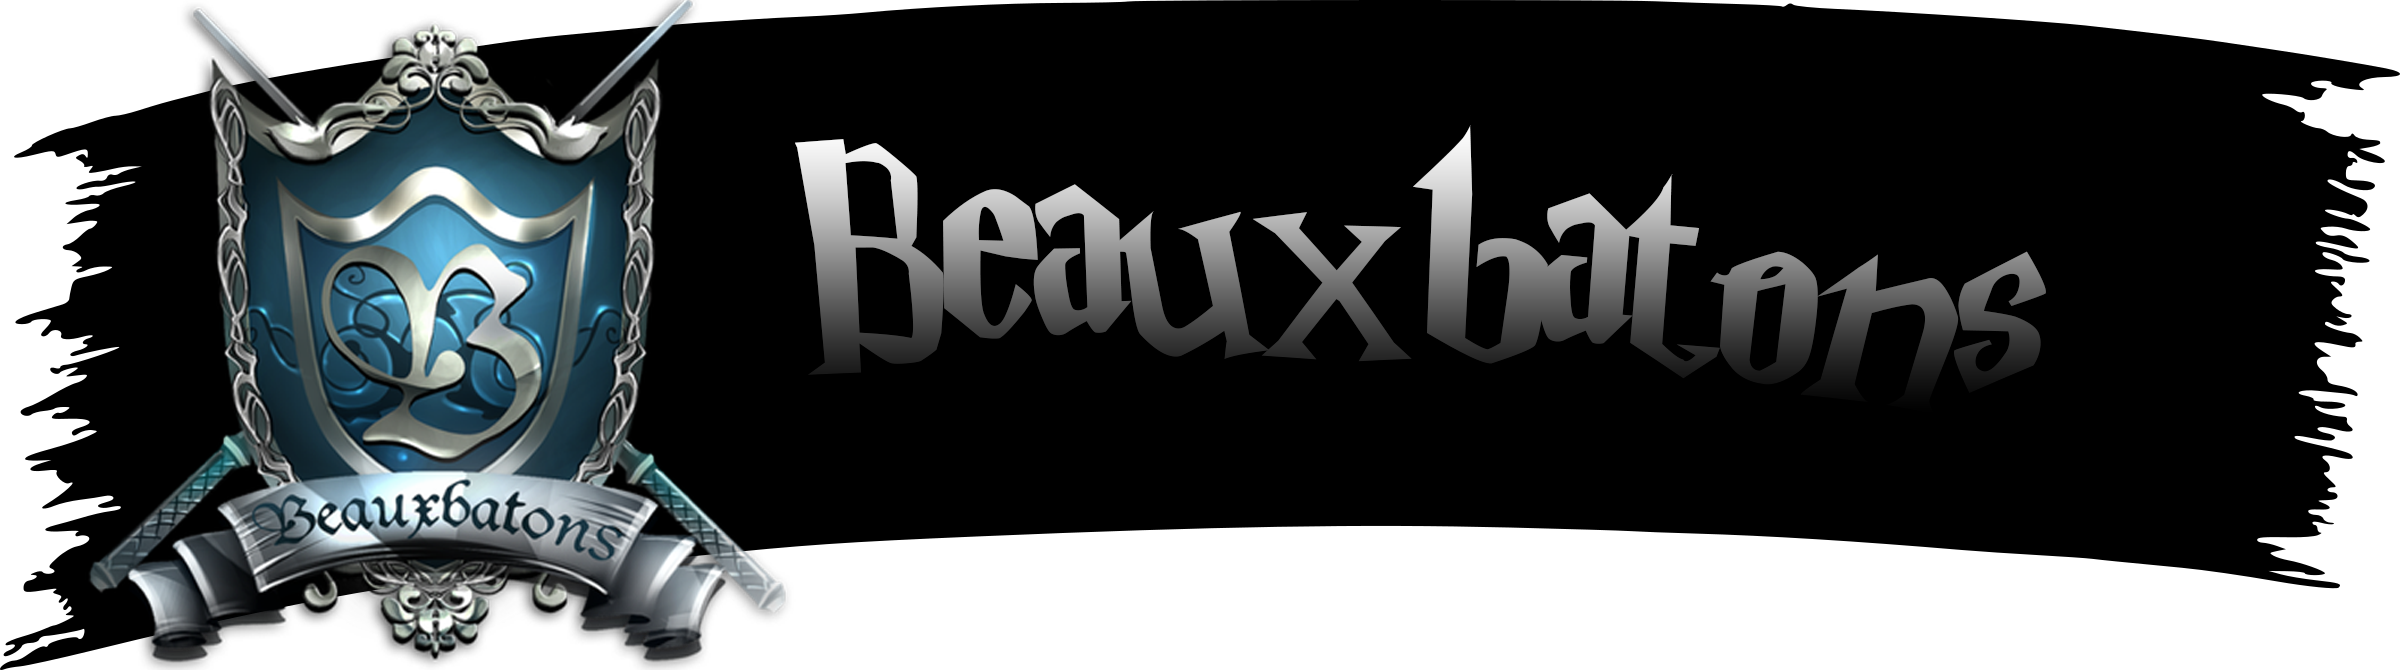 beauxber.png